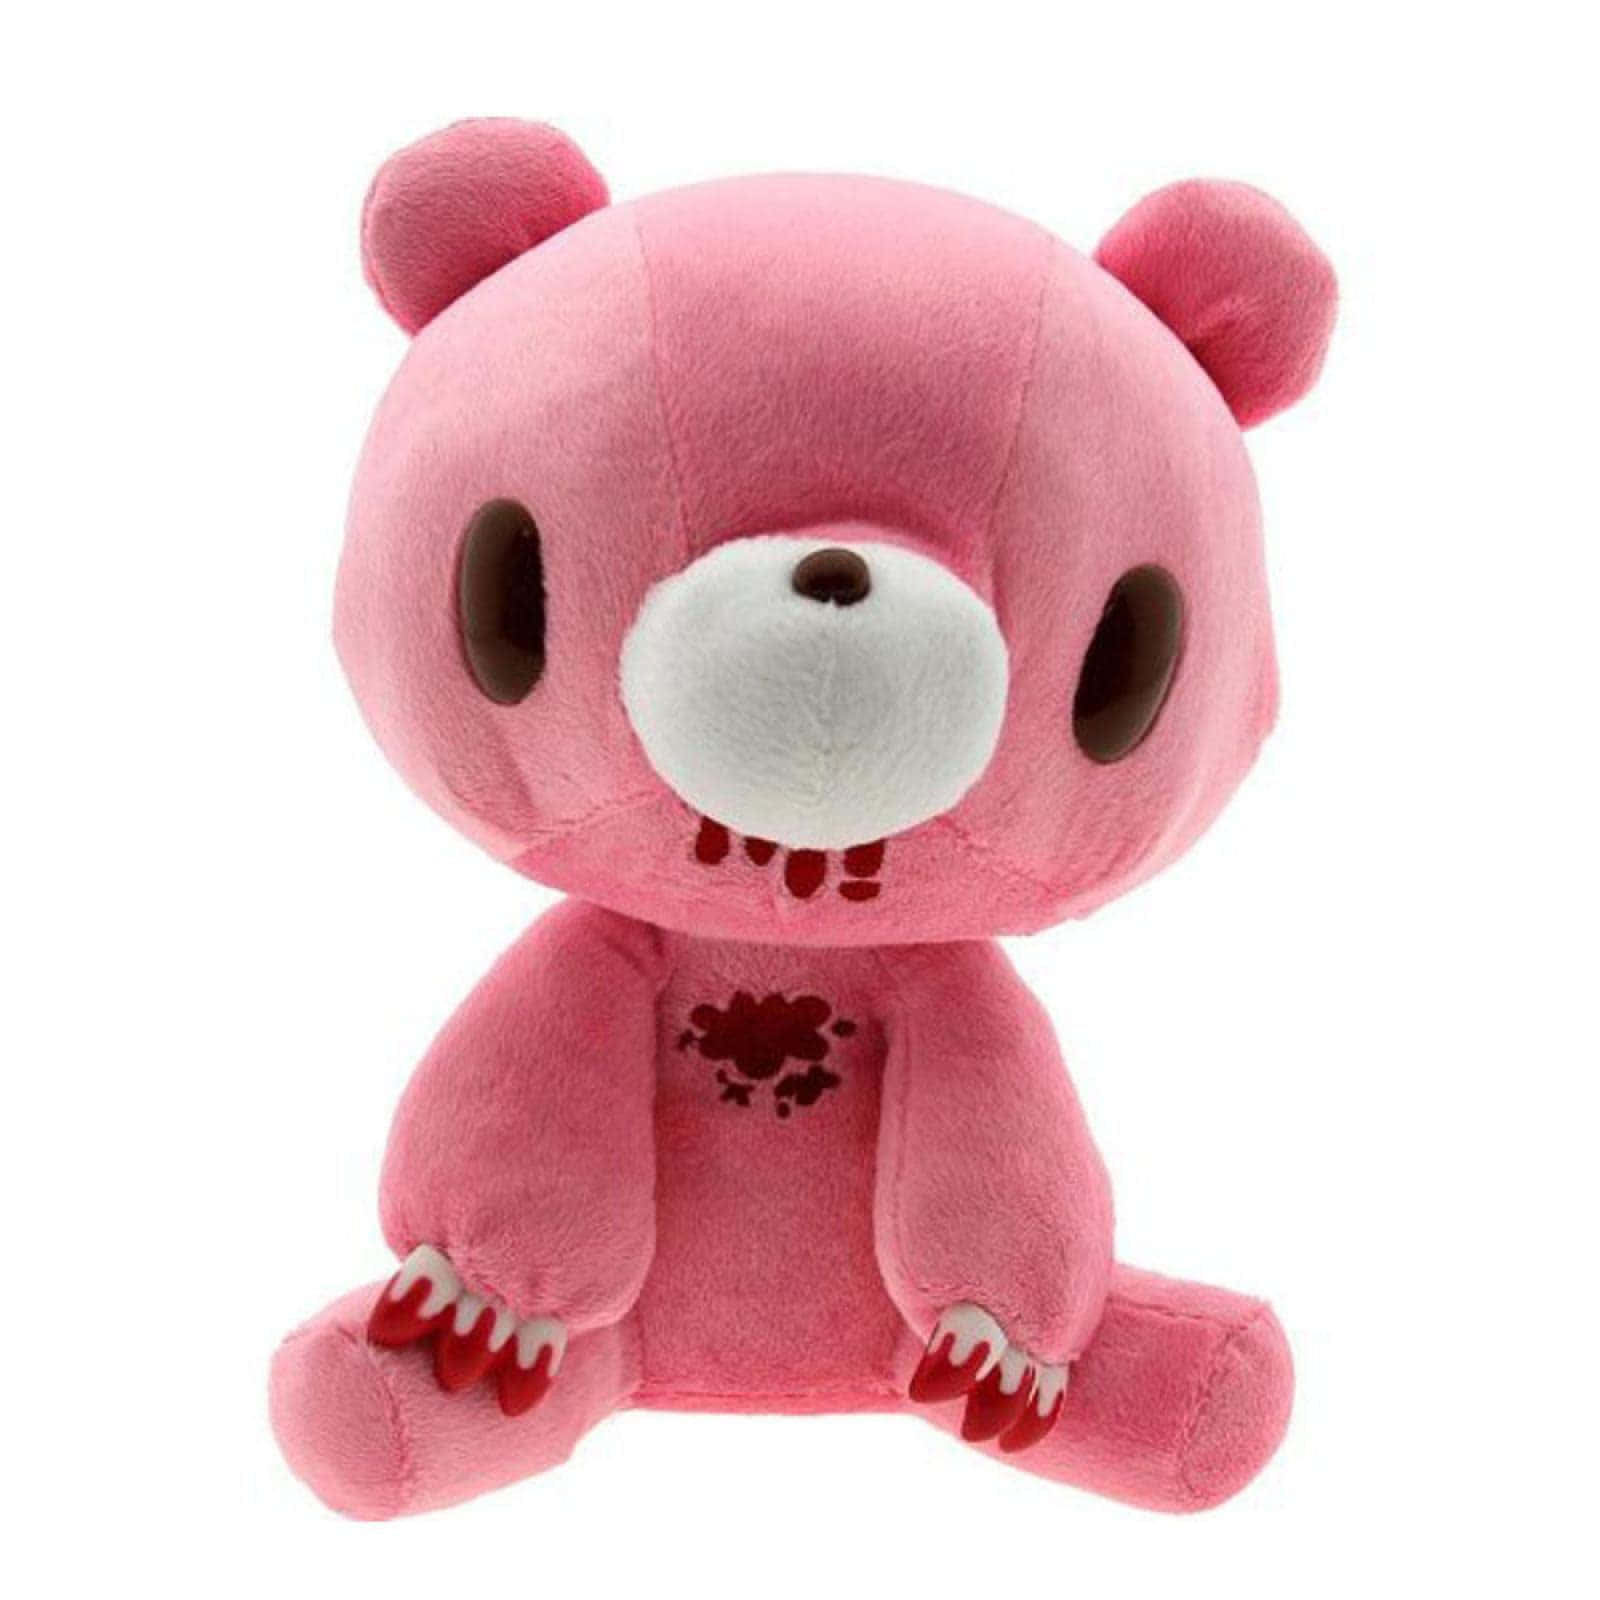 A Pink Stuffed Animal With Blood On Its Face Wallpaper